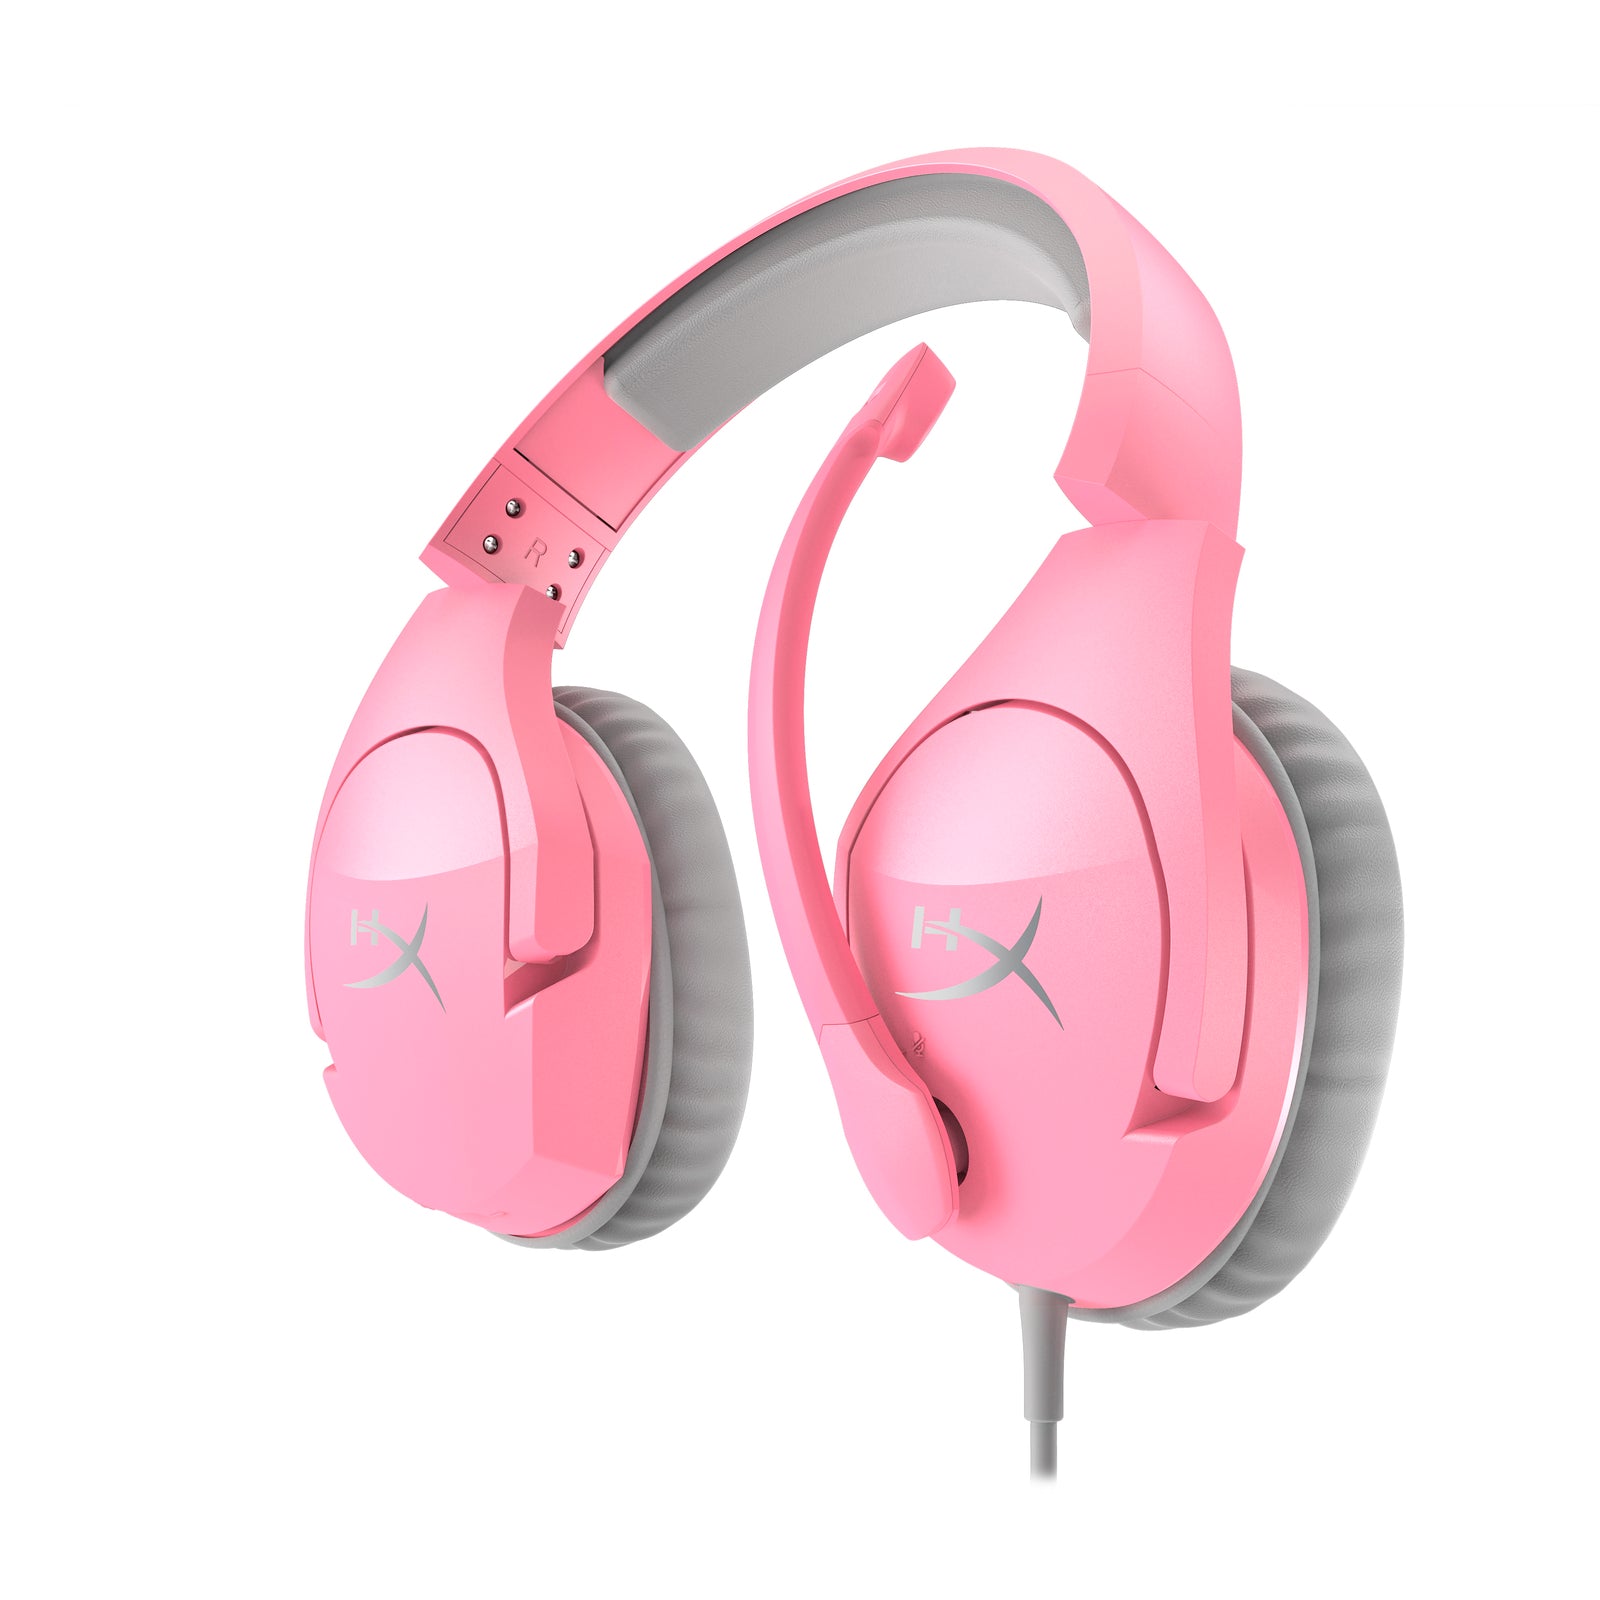 Cloud Stinger - Comfortable Gaming | – Headsets HyperX HyperX ROW